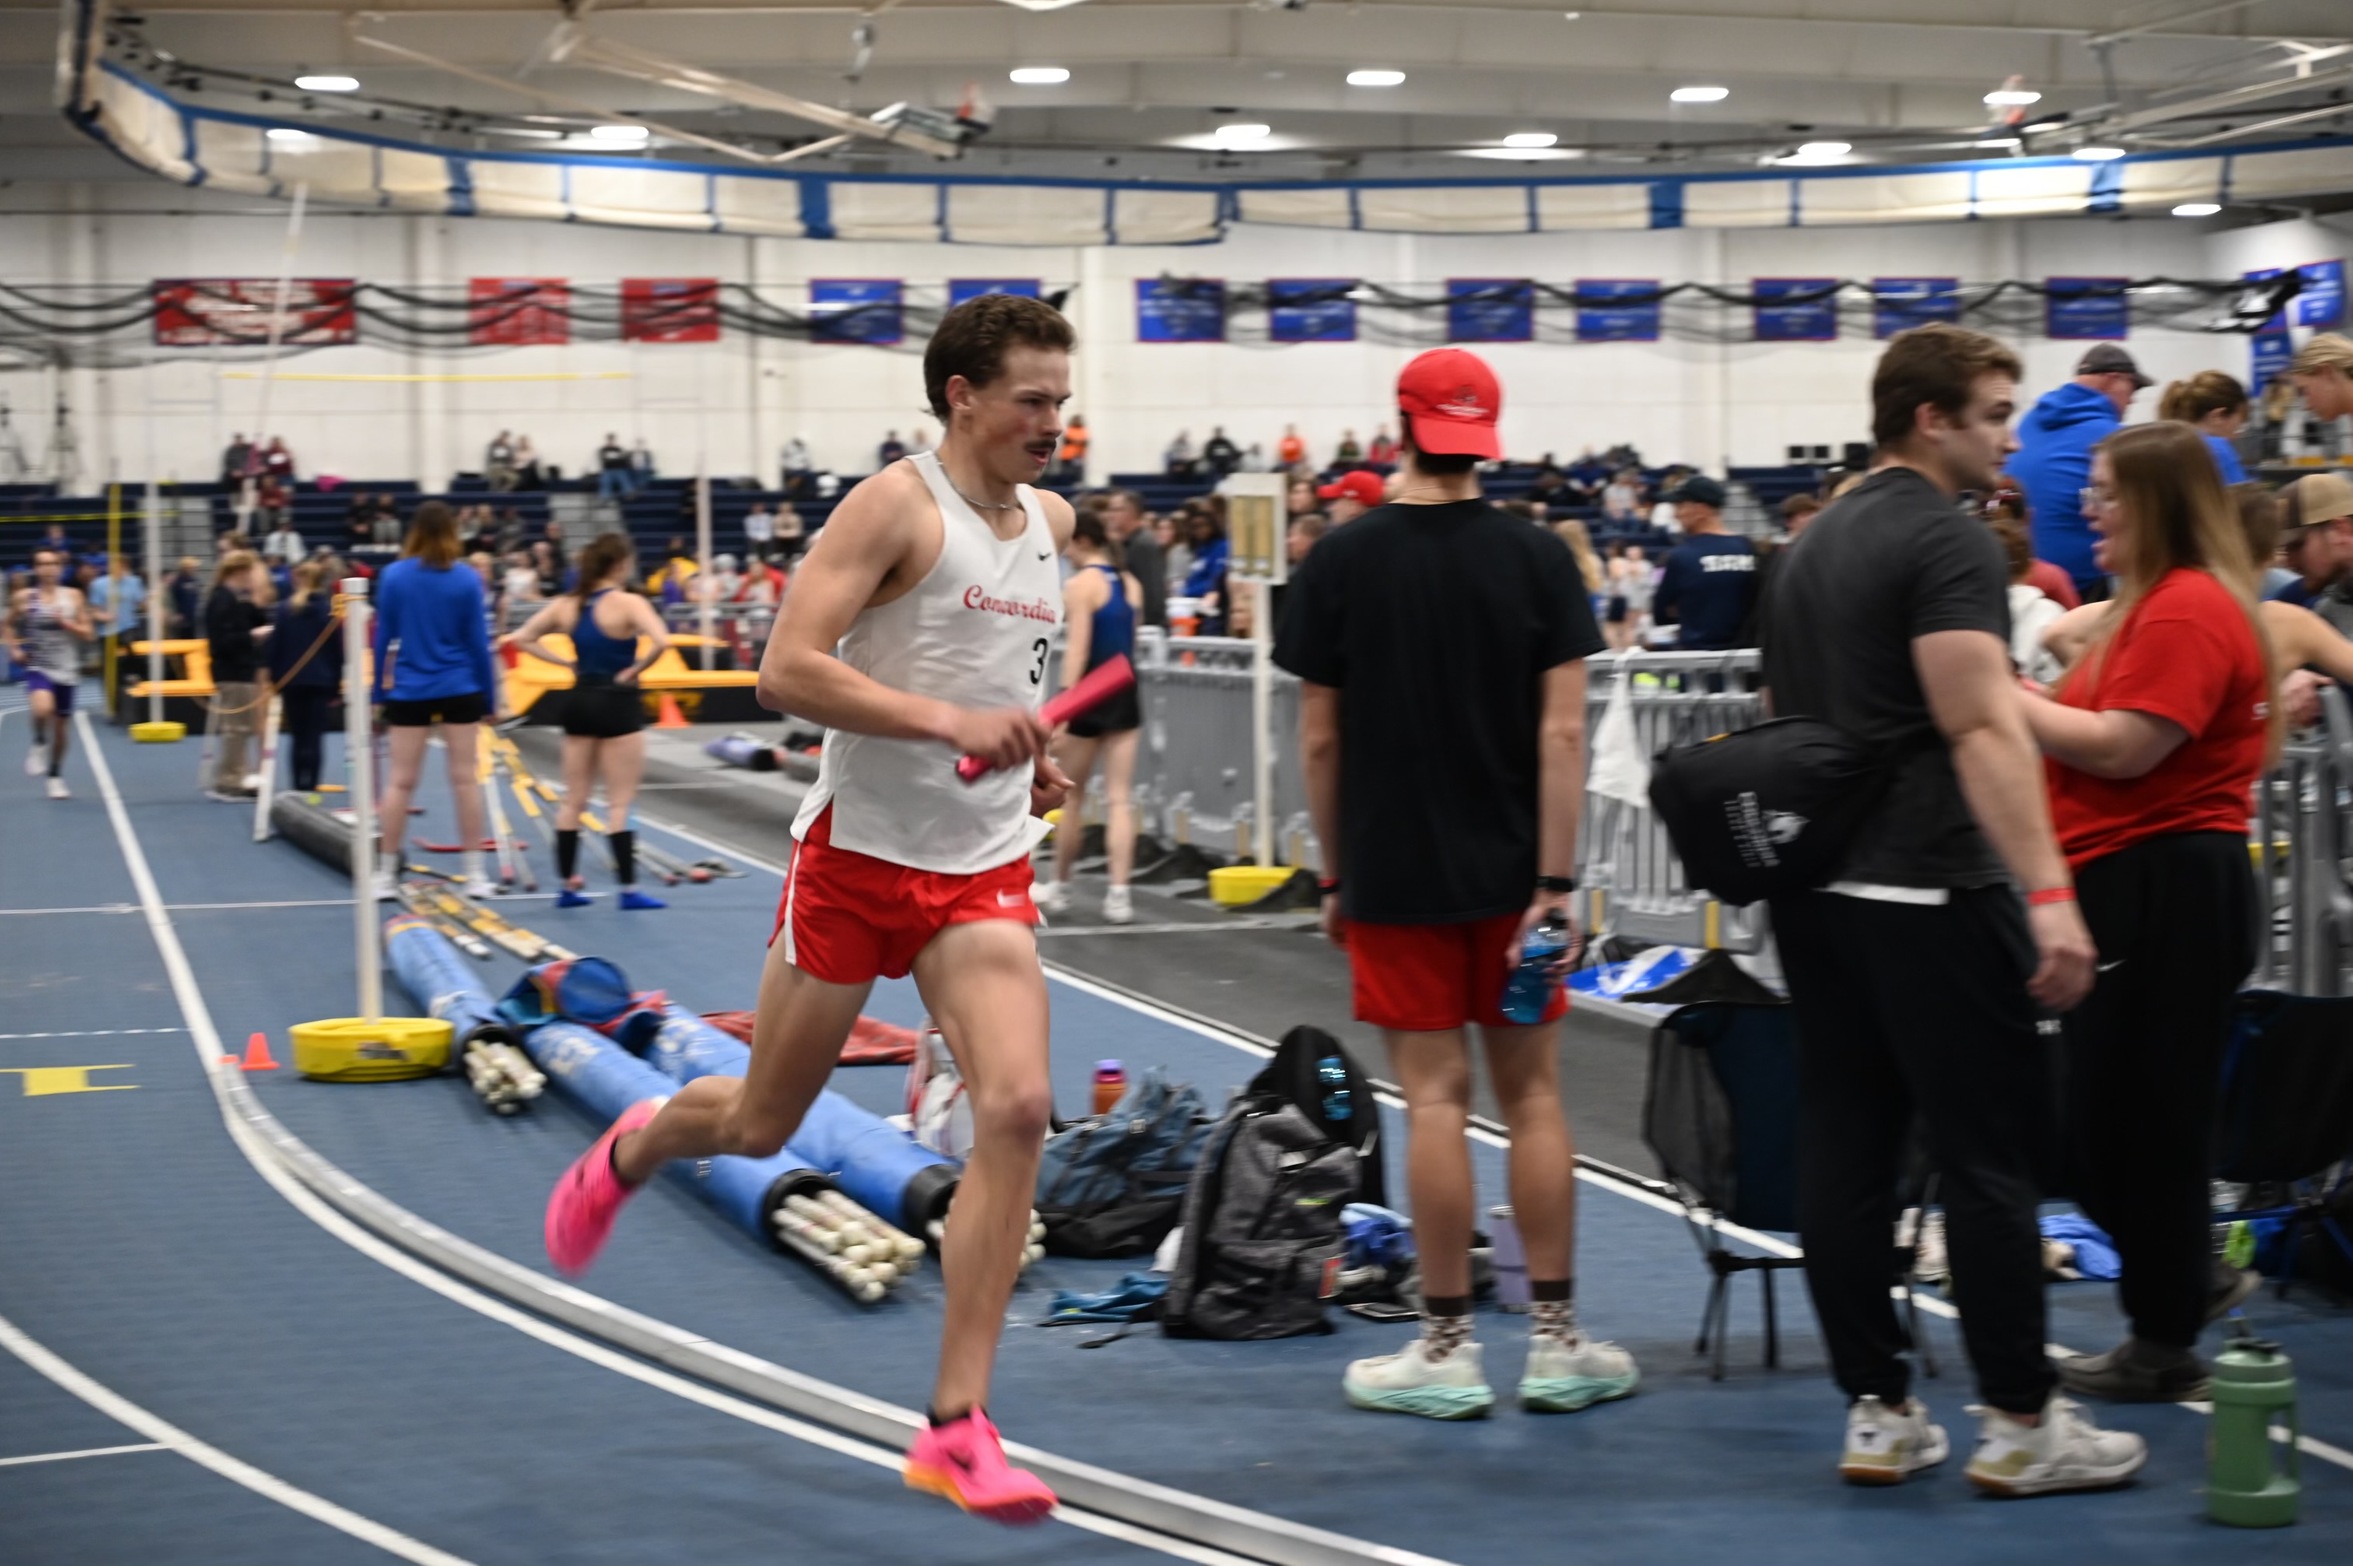 NCCAA CHAMPIONSHIPS DAY 1 RECAP: Men's Track and Field sits in 8th Place heading into Day 2